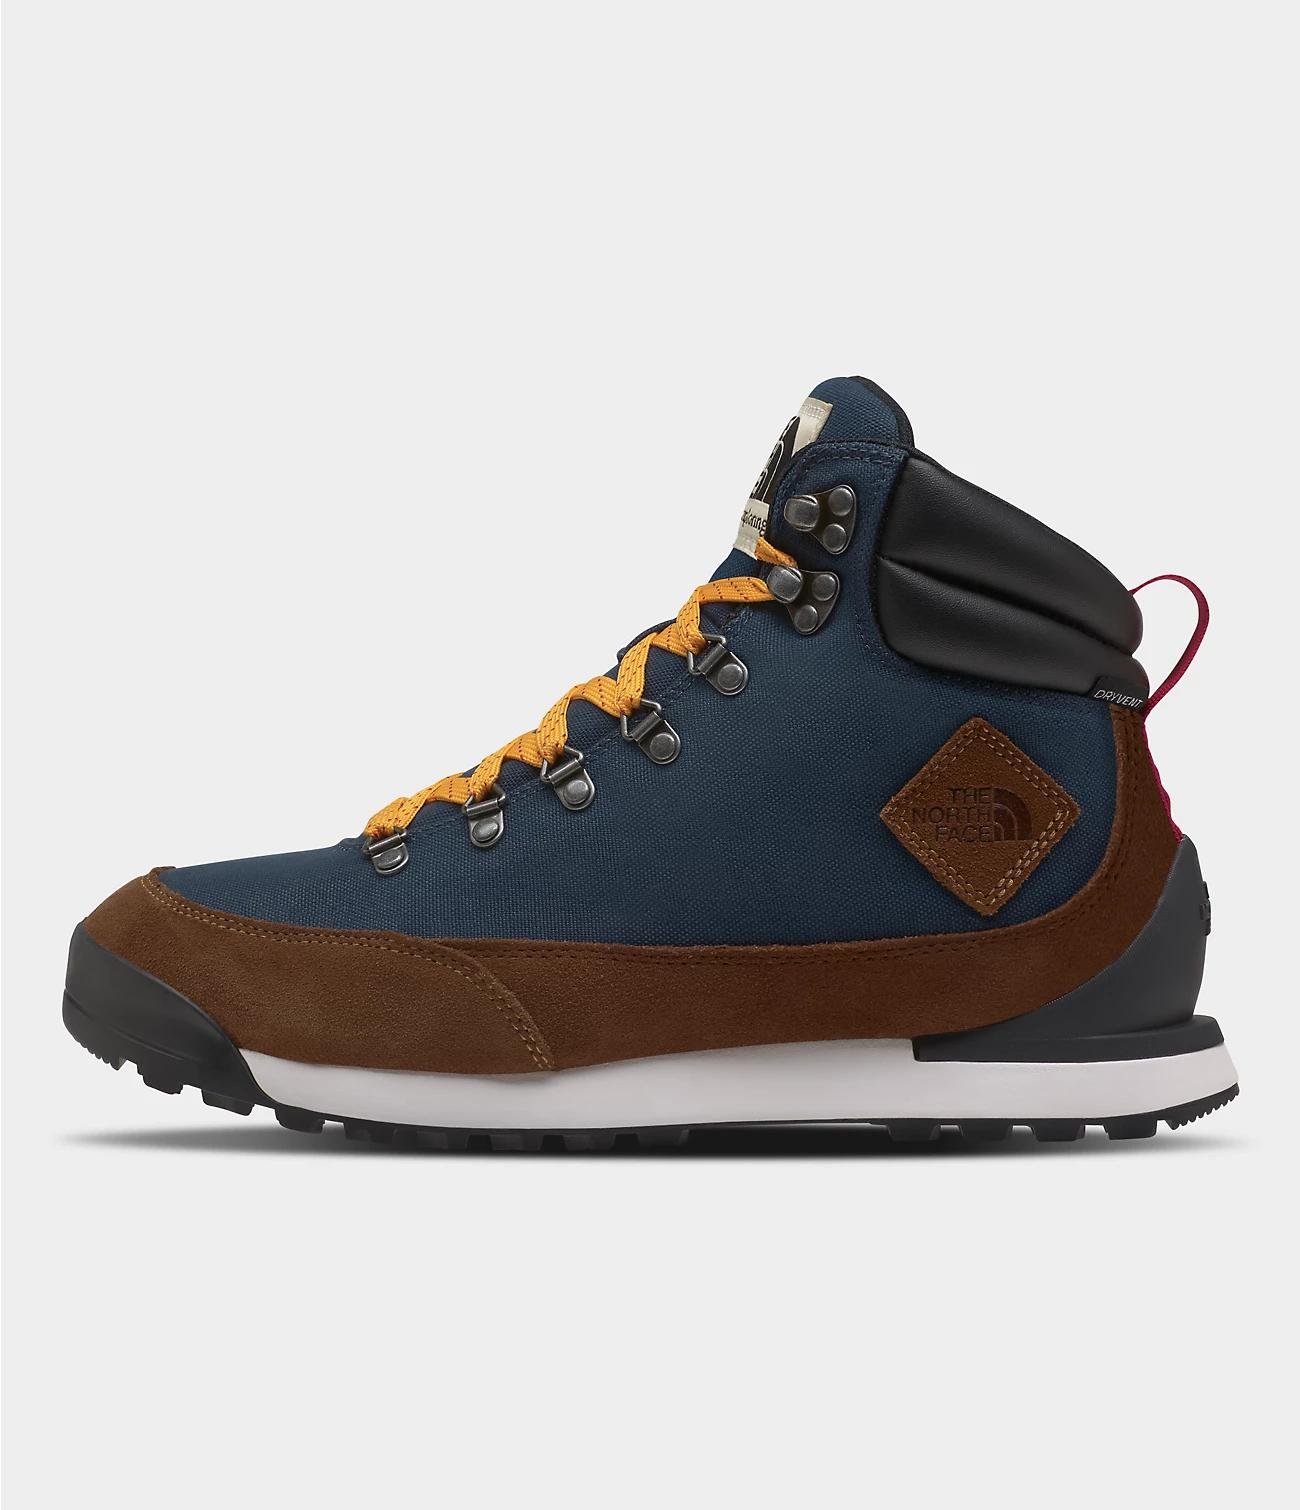 Men's Back-to-berkeley Iv Textile Lifestyle Boots Shady Blue/monks Robe Brown by THE NORTH FACE